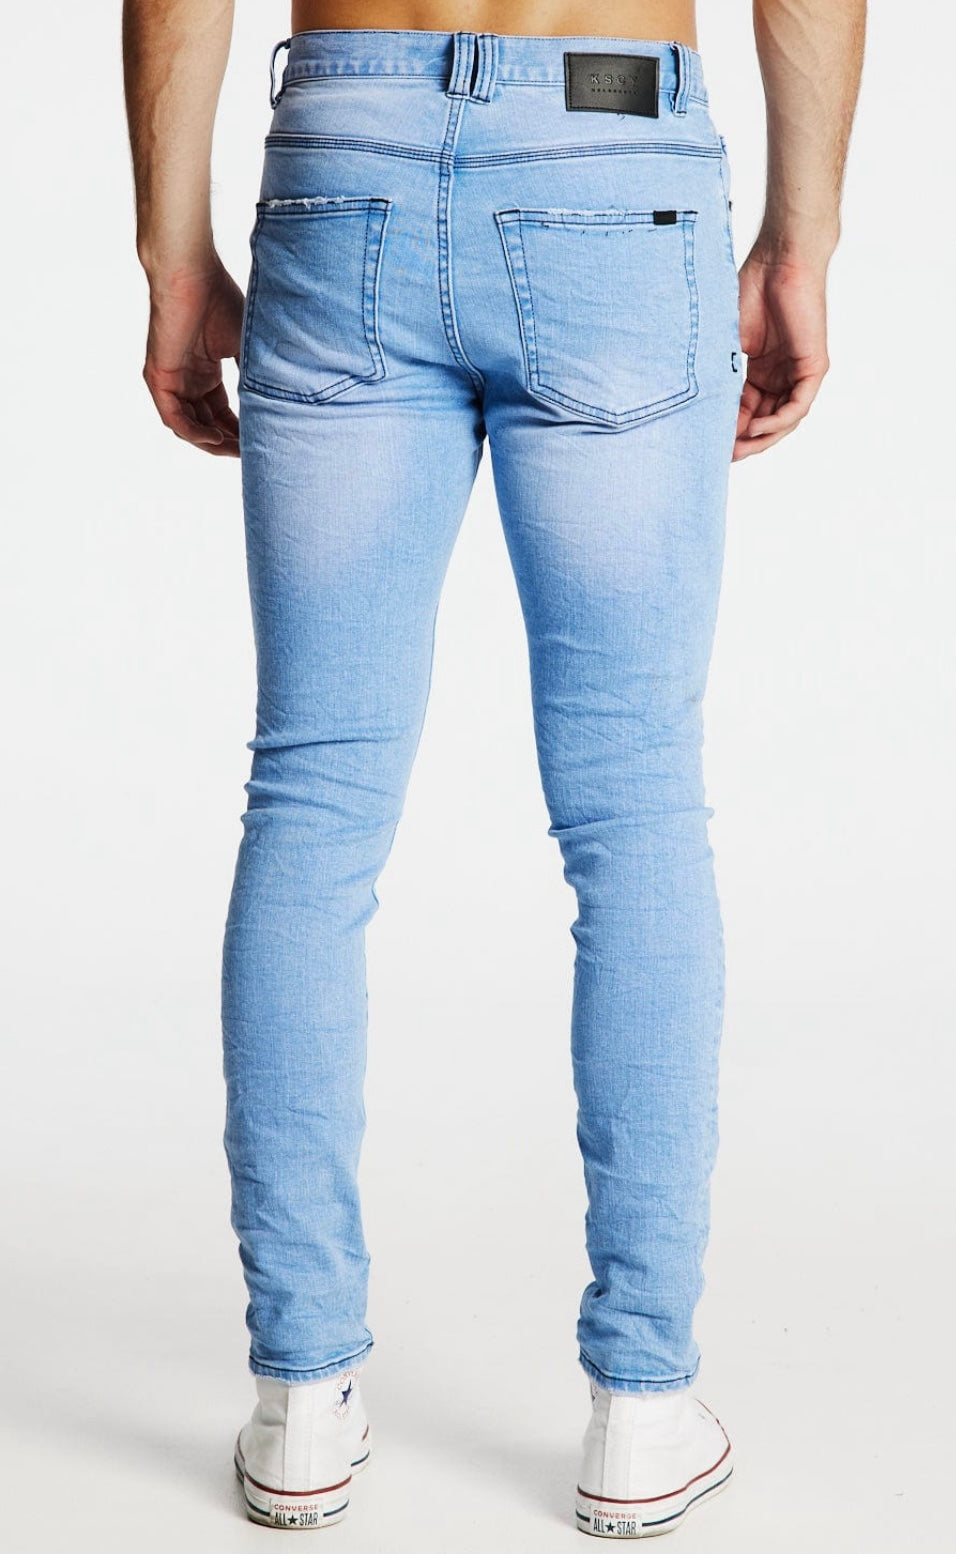 Kiss Chacey K1 Super Skinny Fit Jean- Crystal Blue